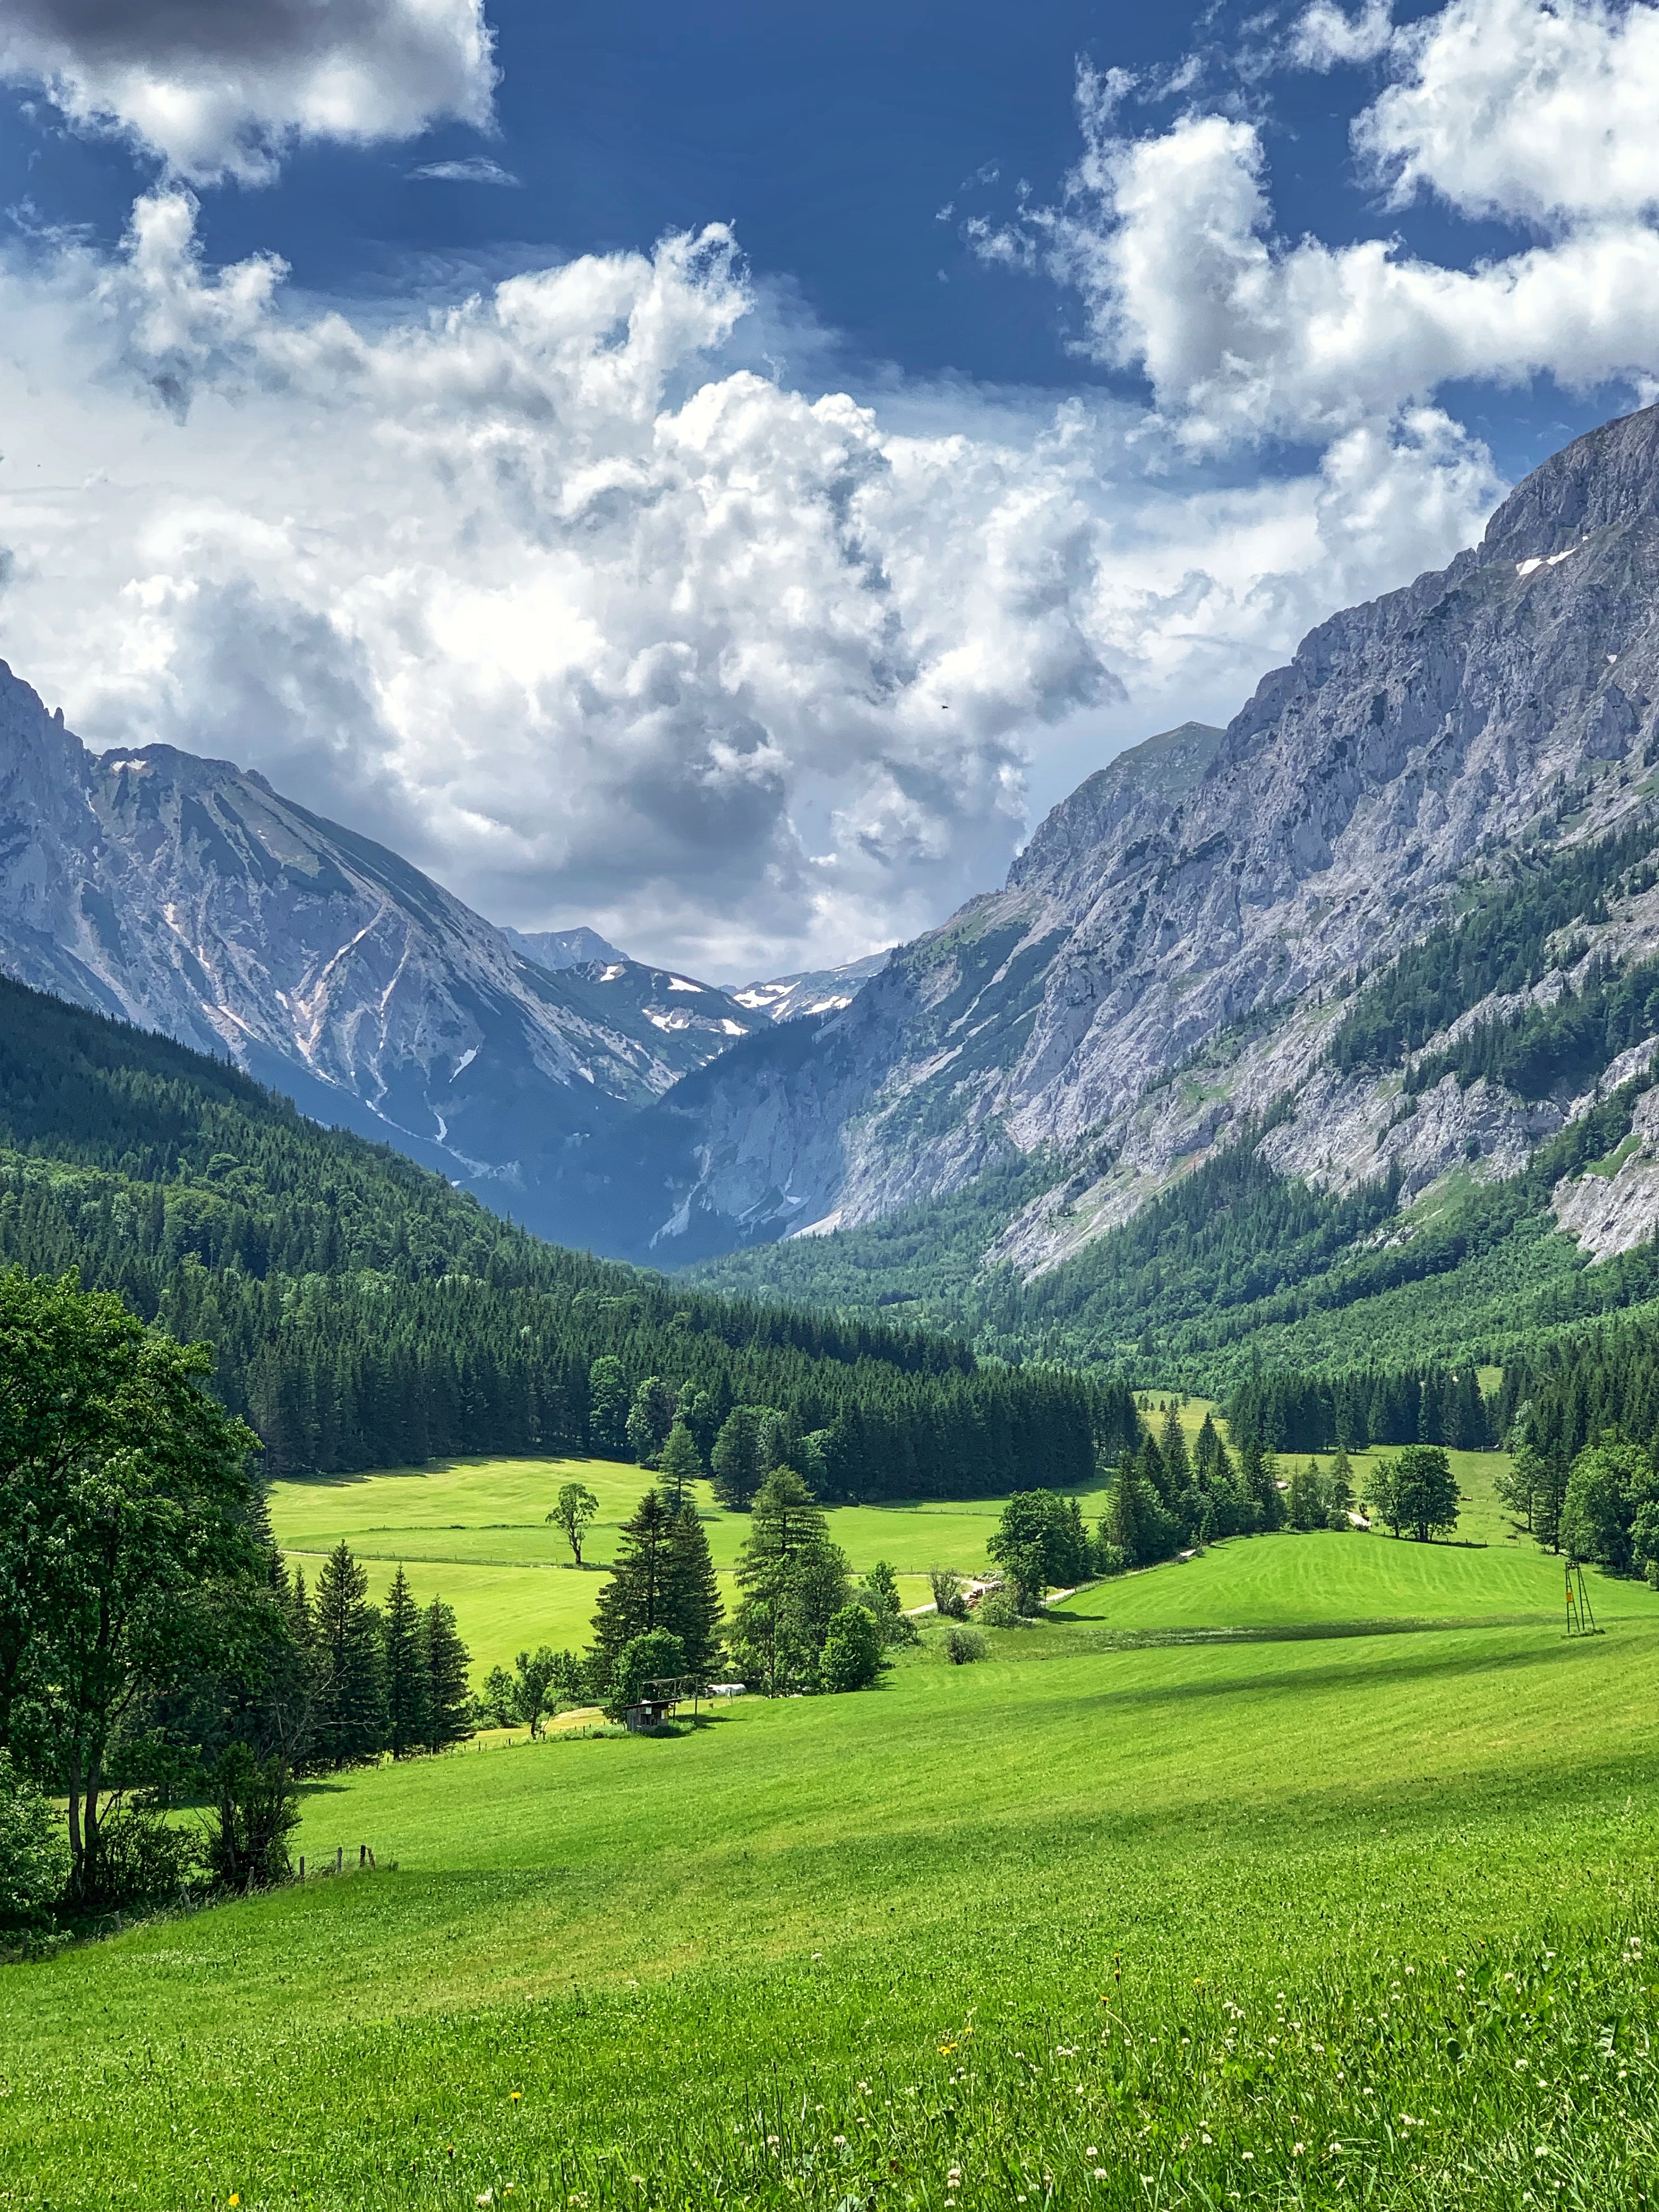 nature, green, landscape, trees, mountains, grass, valley